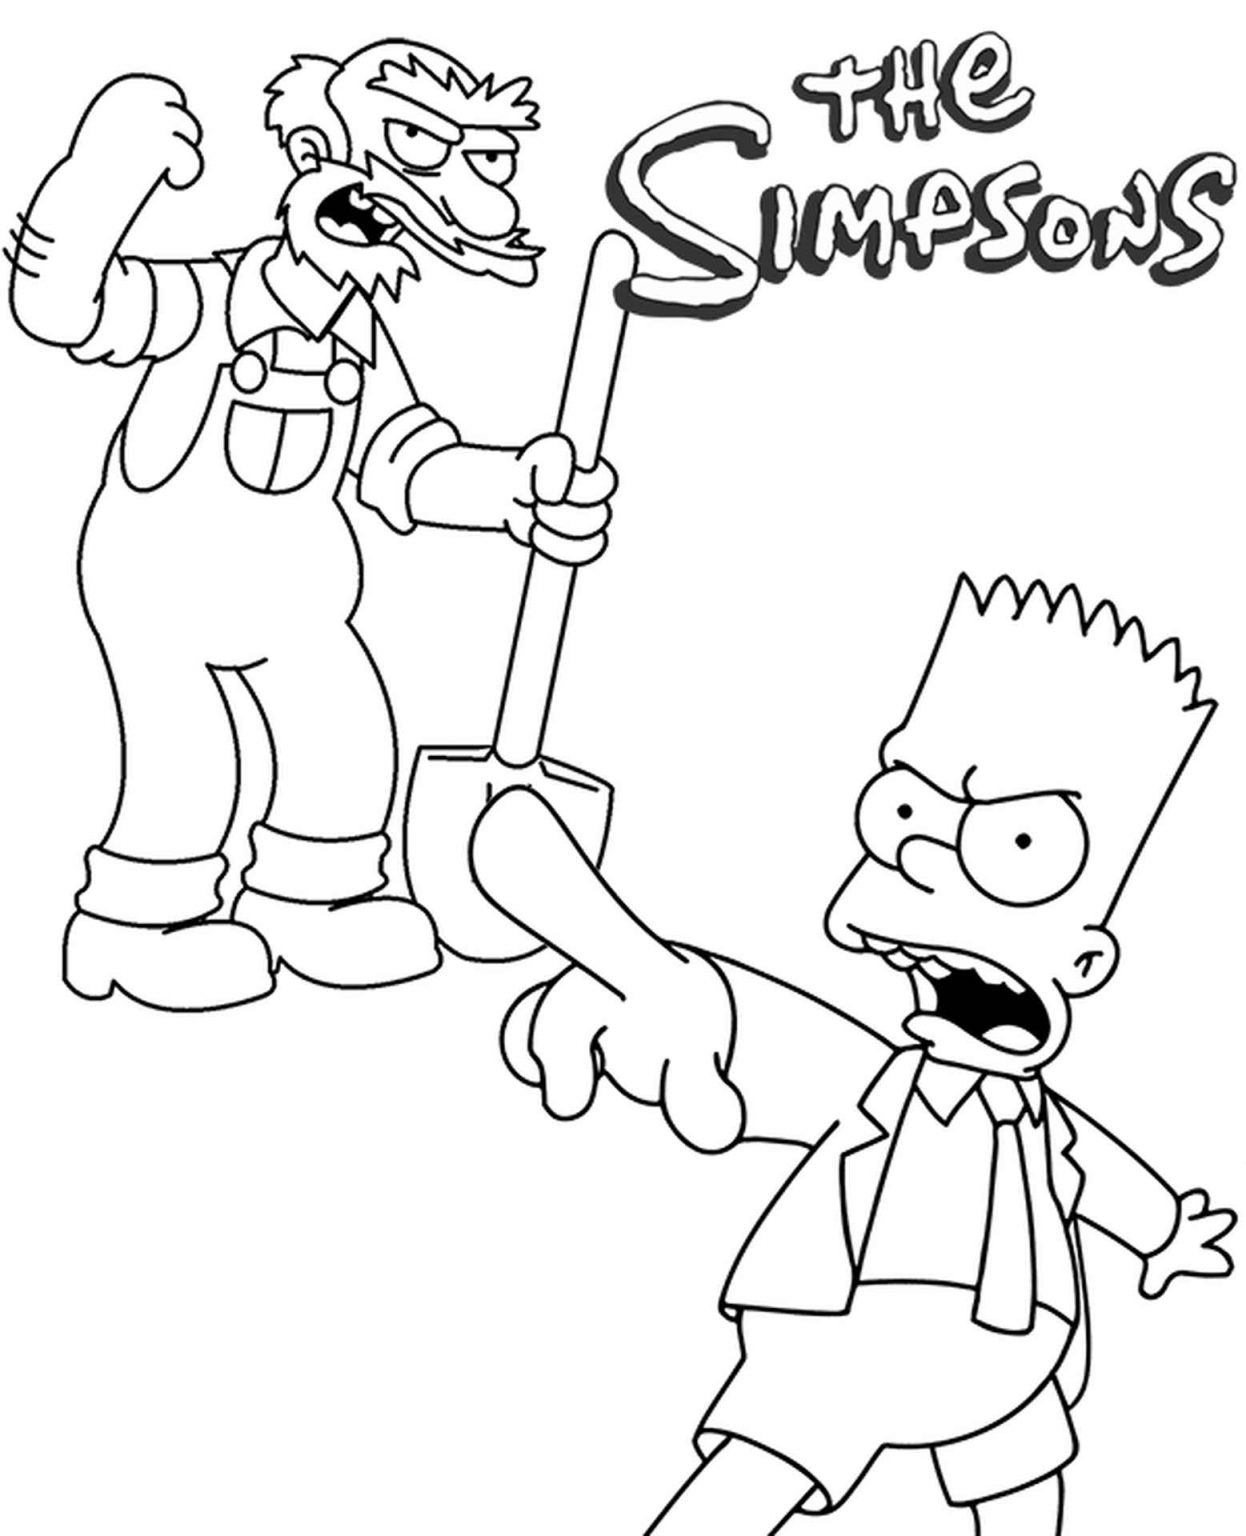 coloring pages of the simpsons